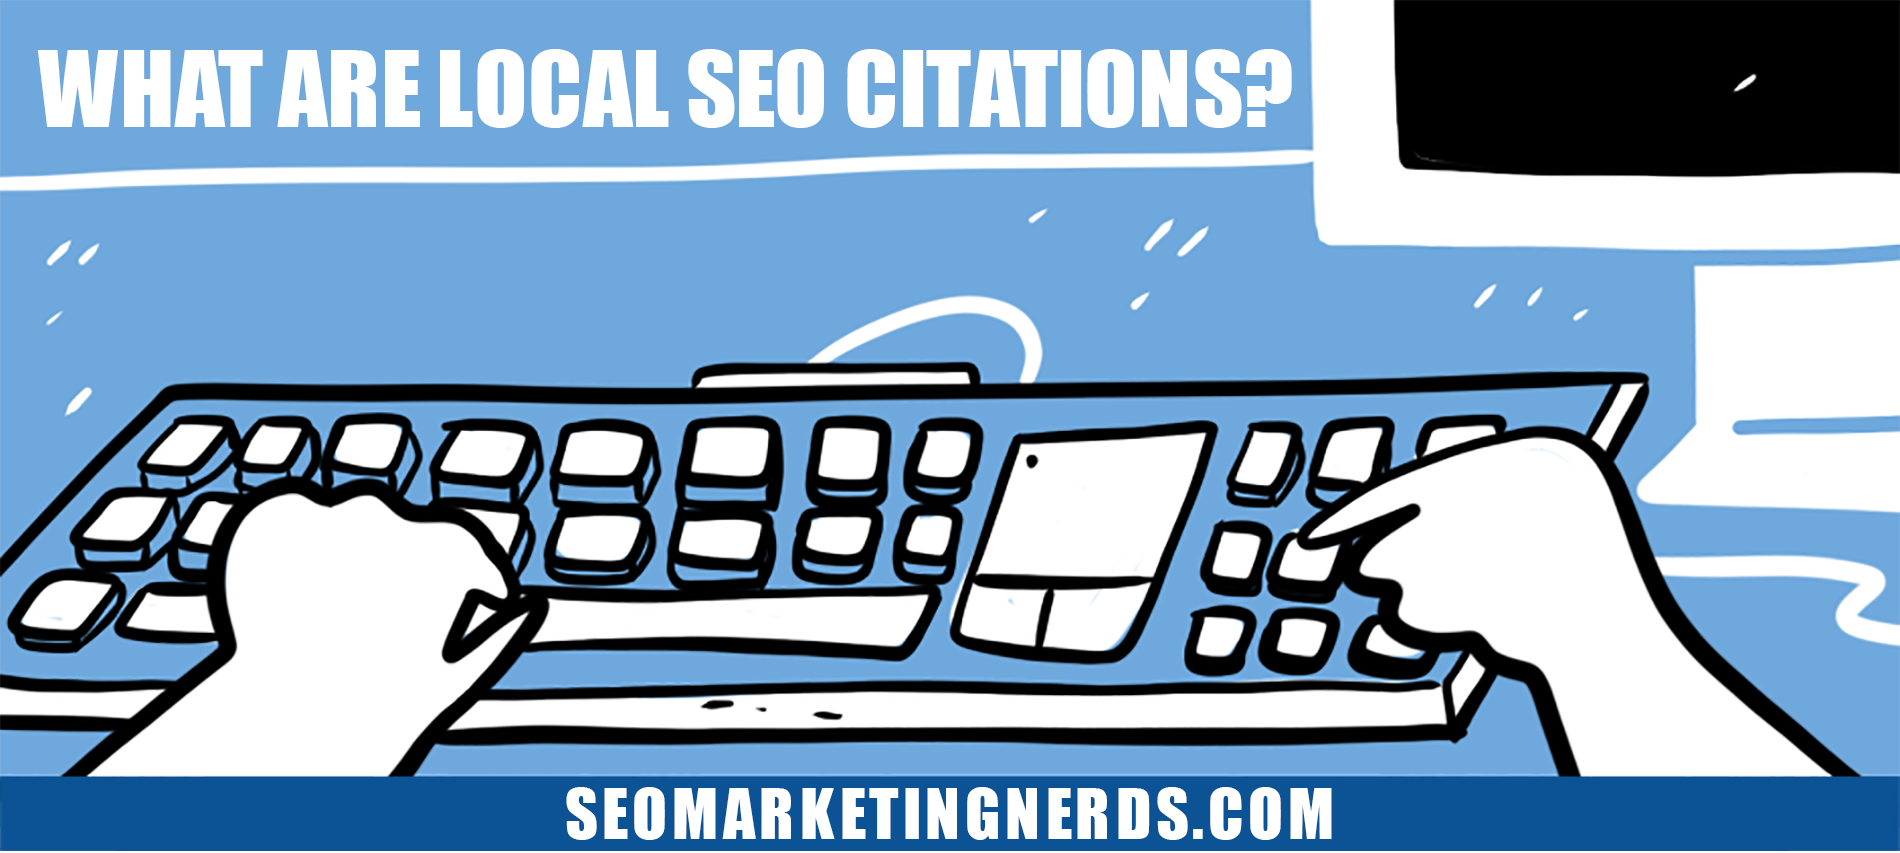 What are local SEO citations?